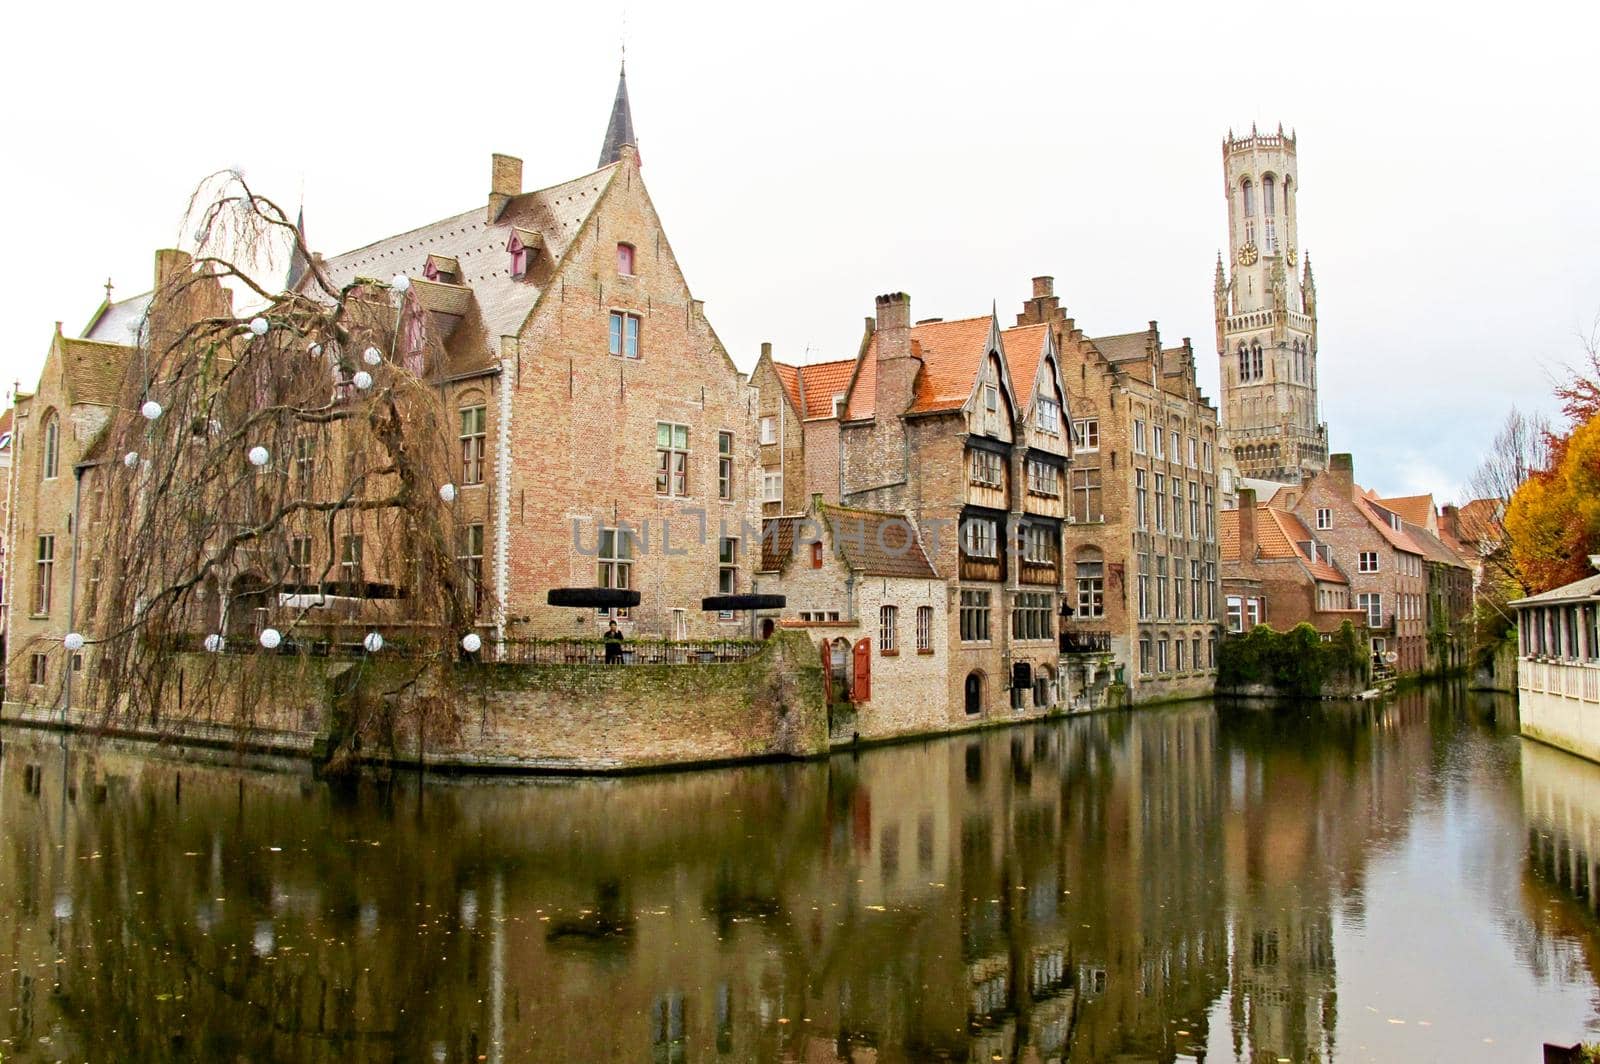 Brugge/Belgium - Autumn. Old town buildings on the canal. by Olayola